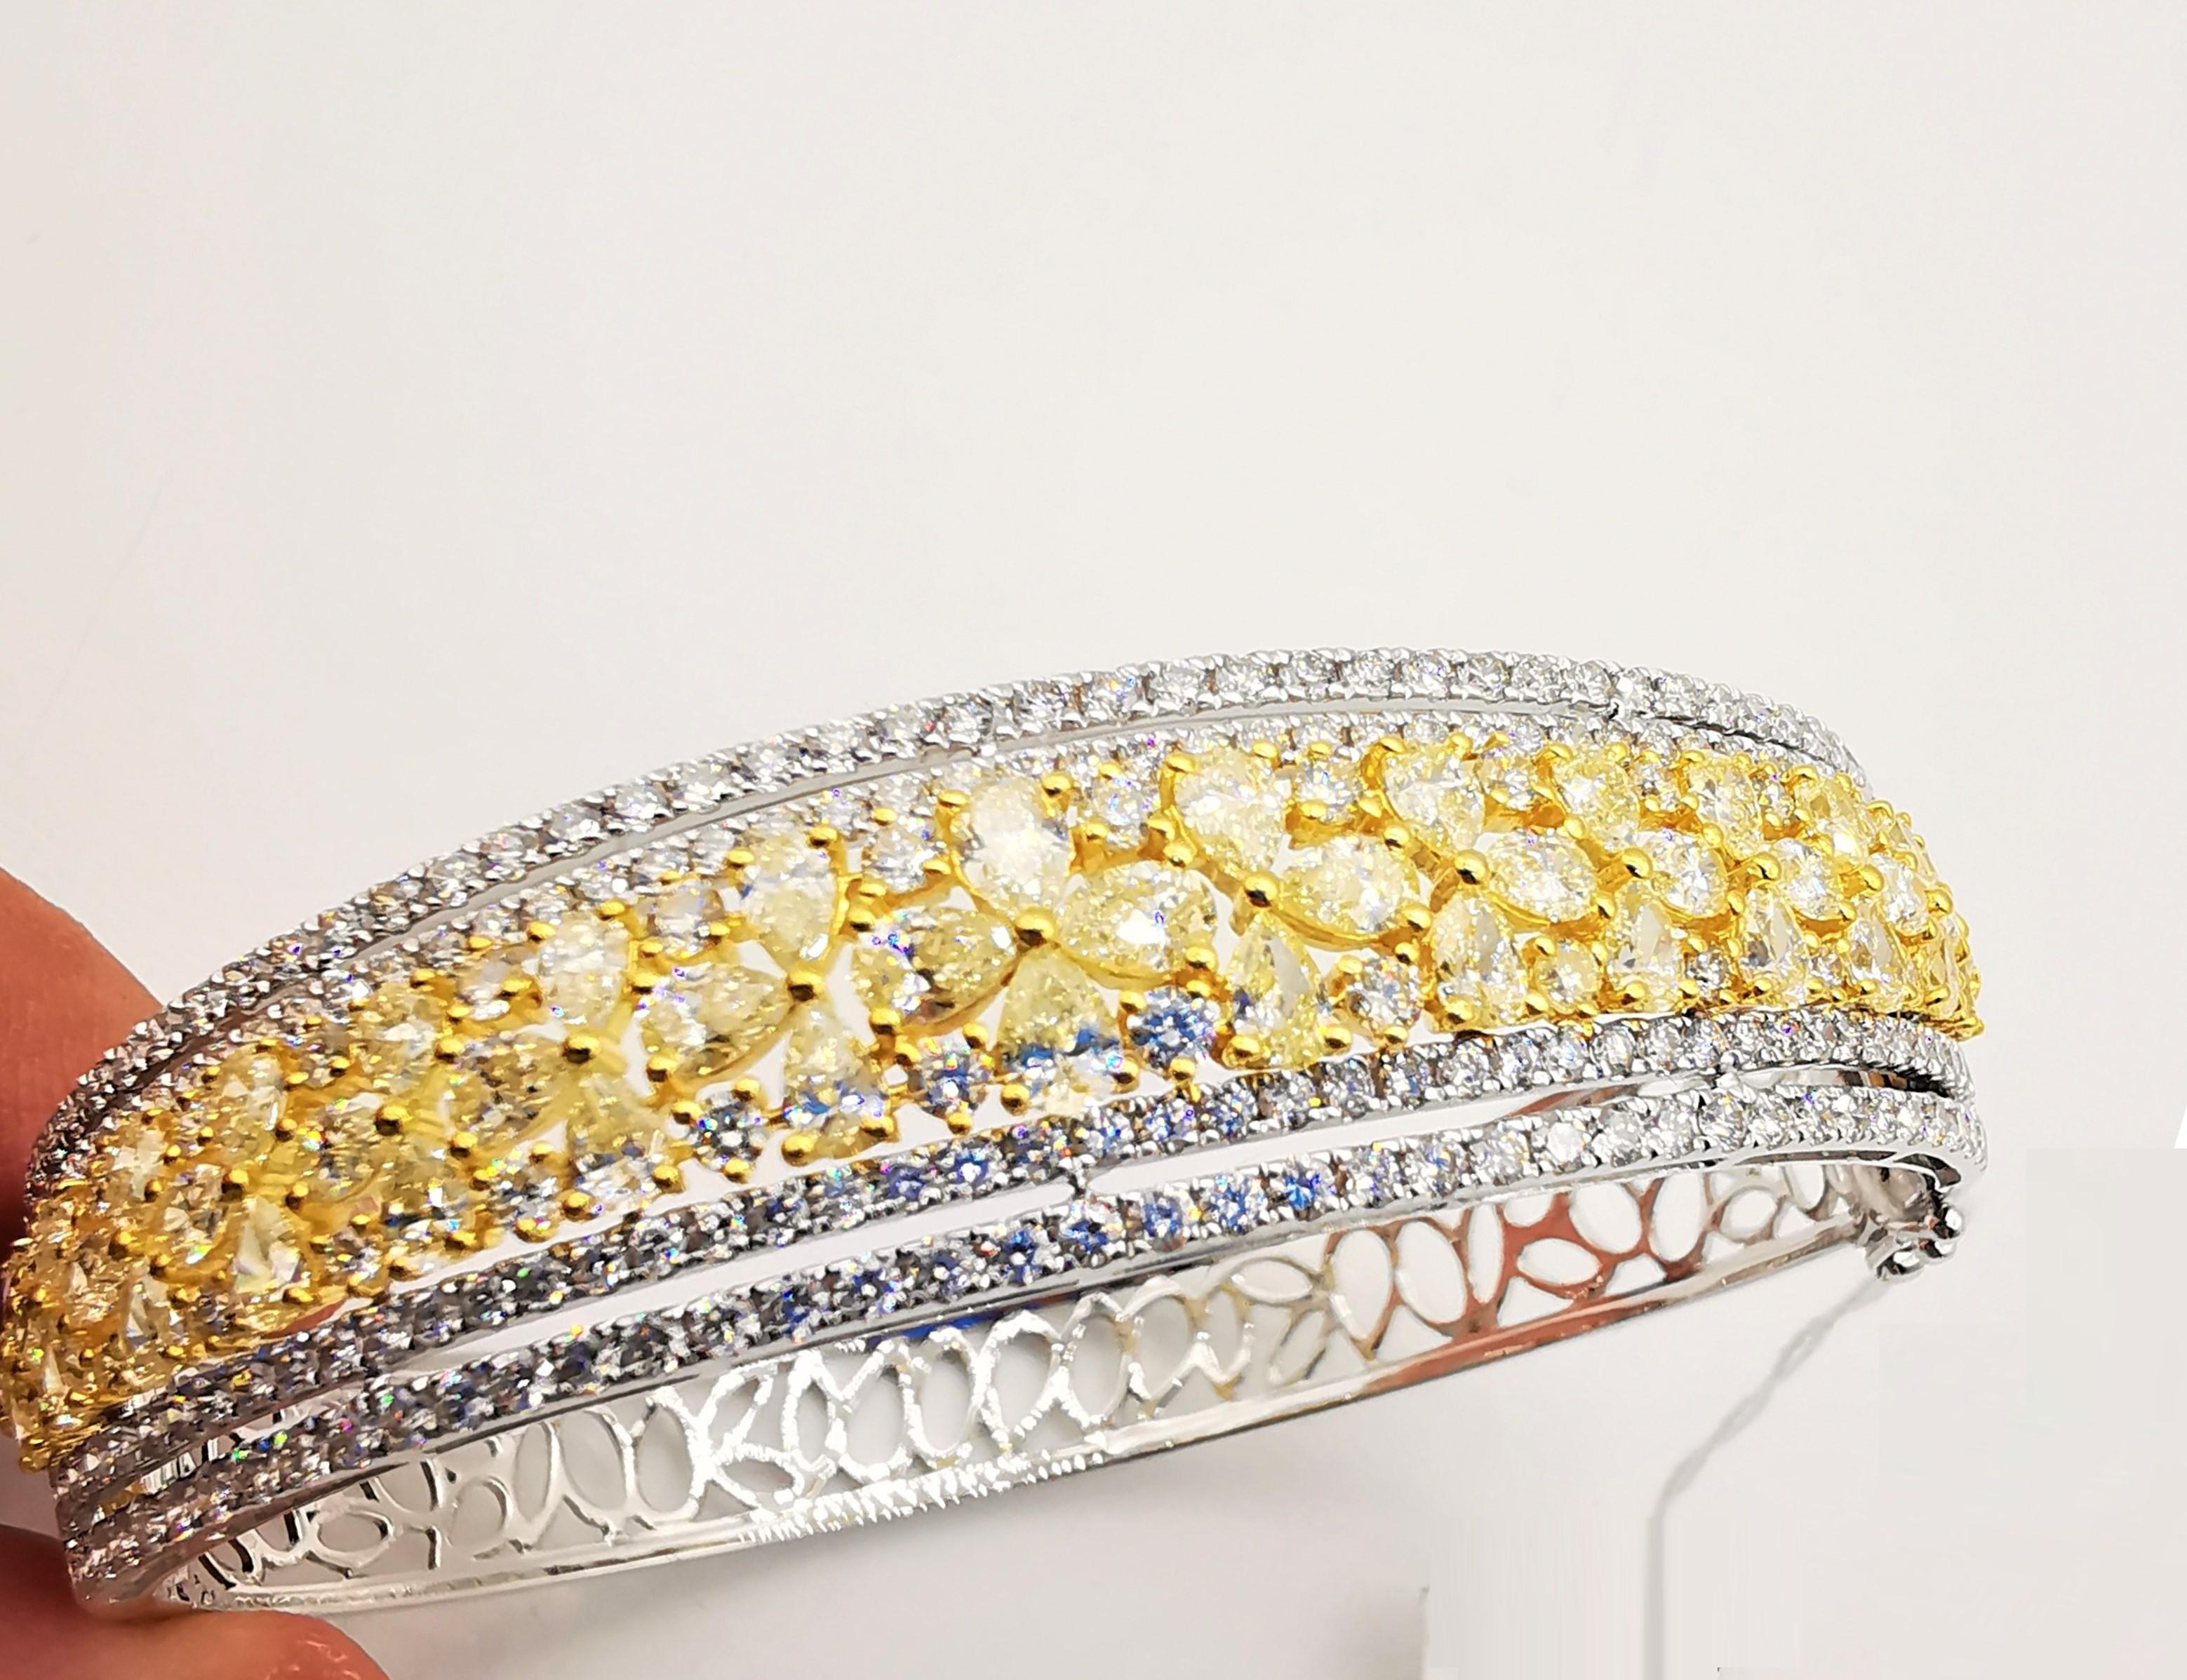 The Following Item we are offering is a Rare Important Radiant 18KT Gold Large Magnificent Rare Fancy Gorgeous Fancy Yellow Diamond and White Diamond Bangle Bracelet. Bangle is comprised of Exquisite Fancy Magnificent Pear Cut Yellow Diamonds